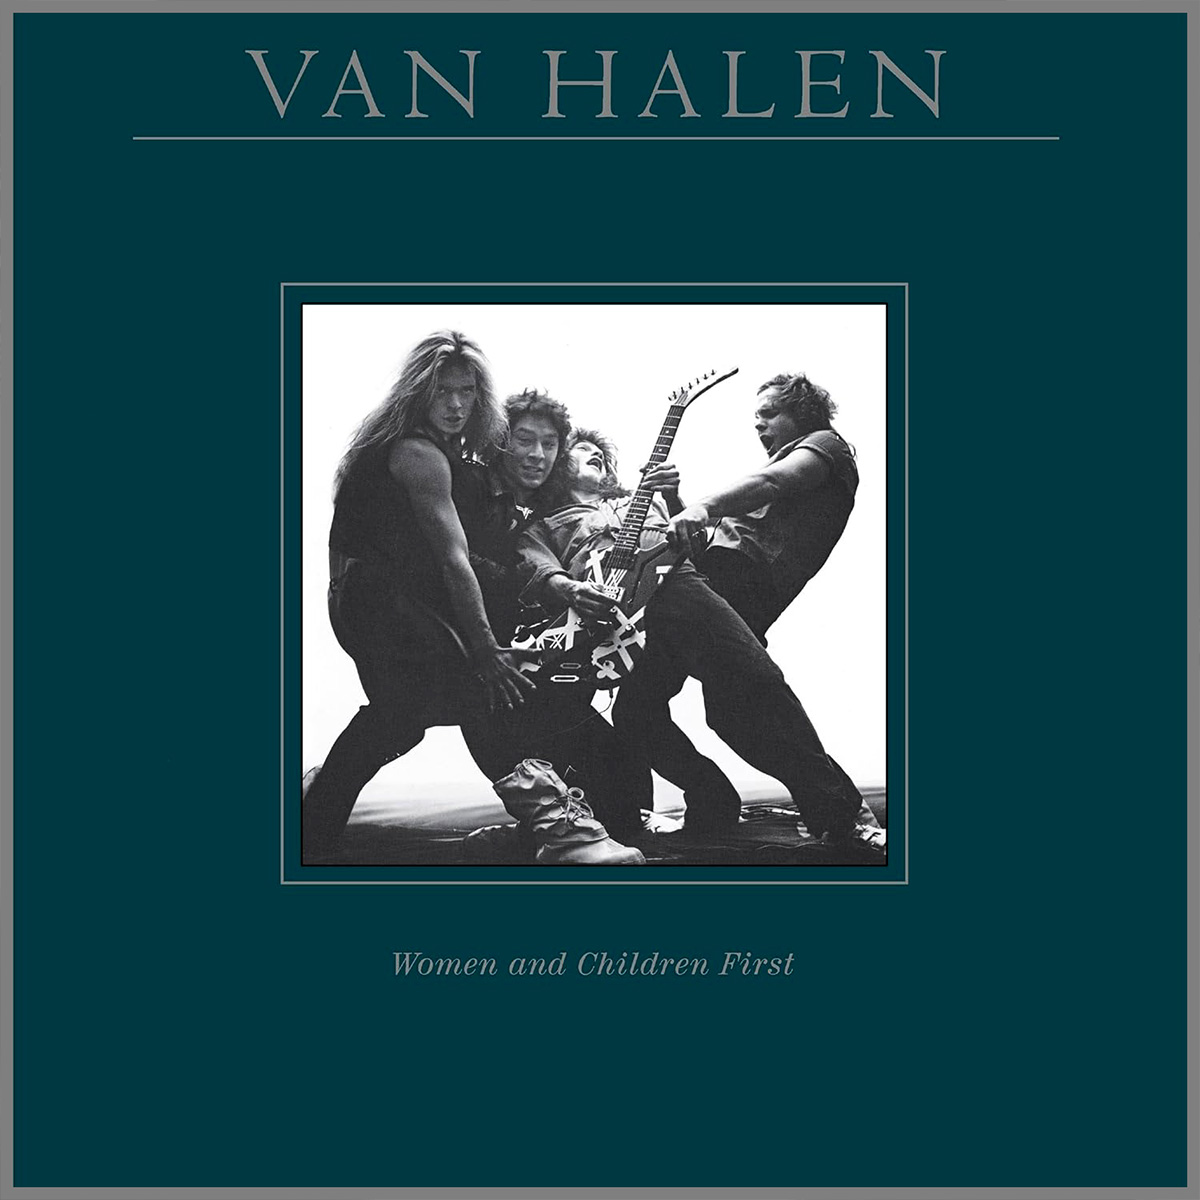 Women and Children First cd cover